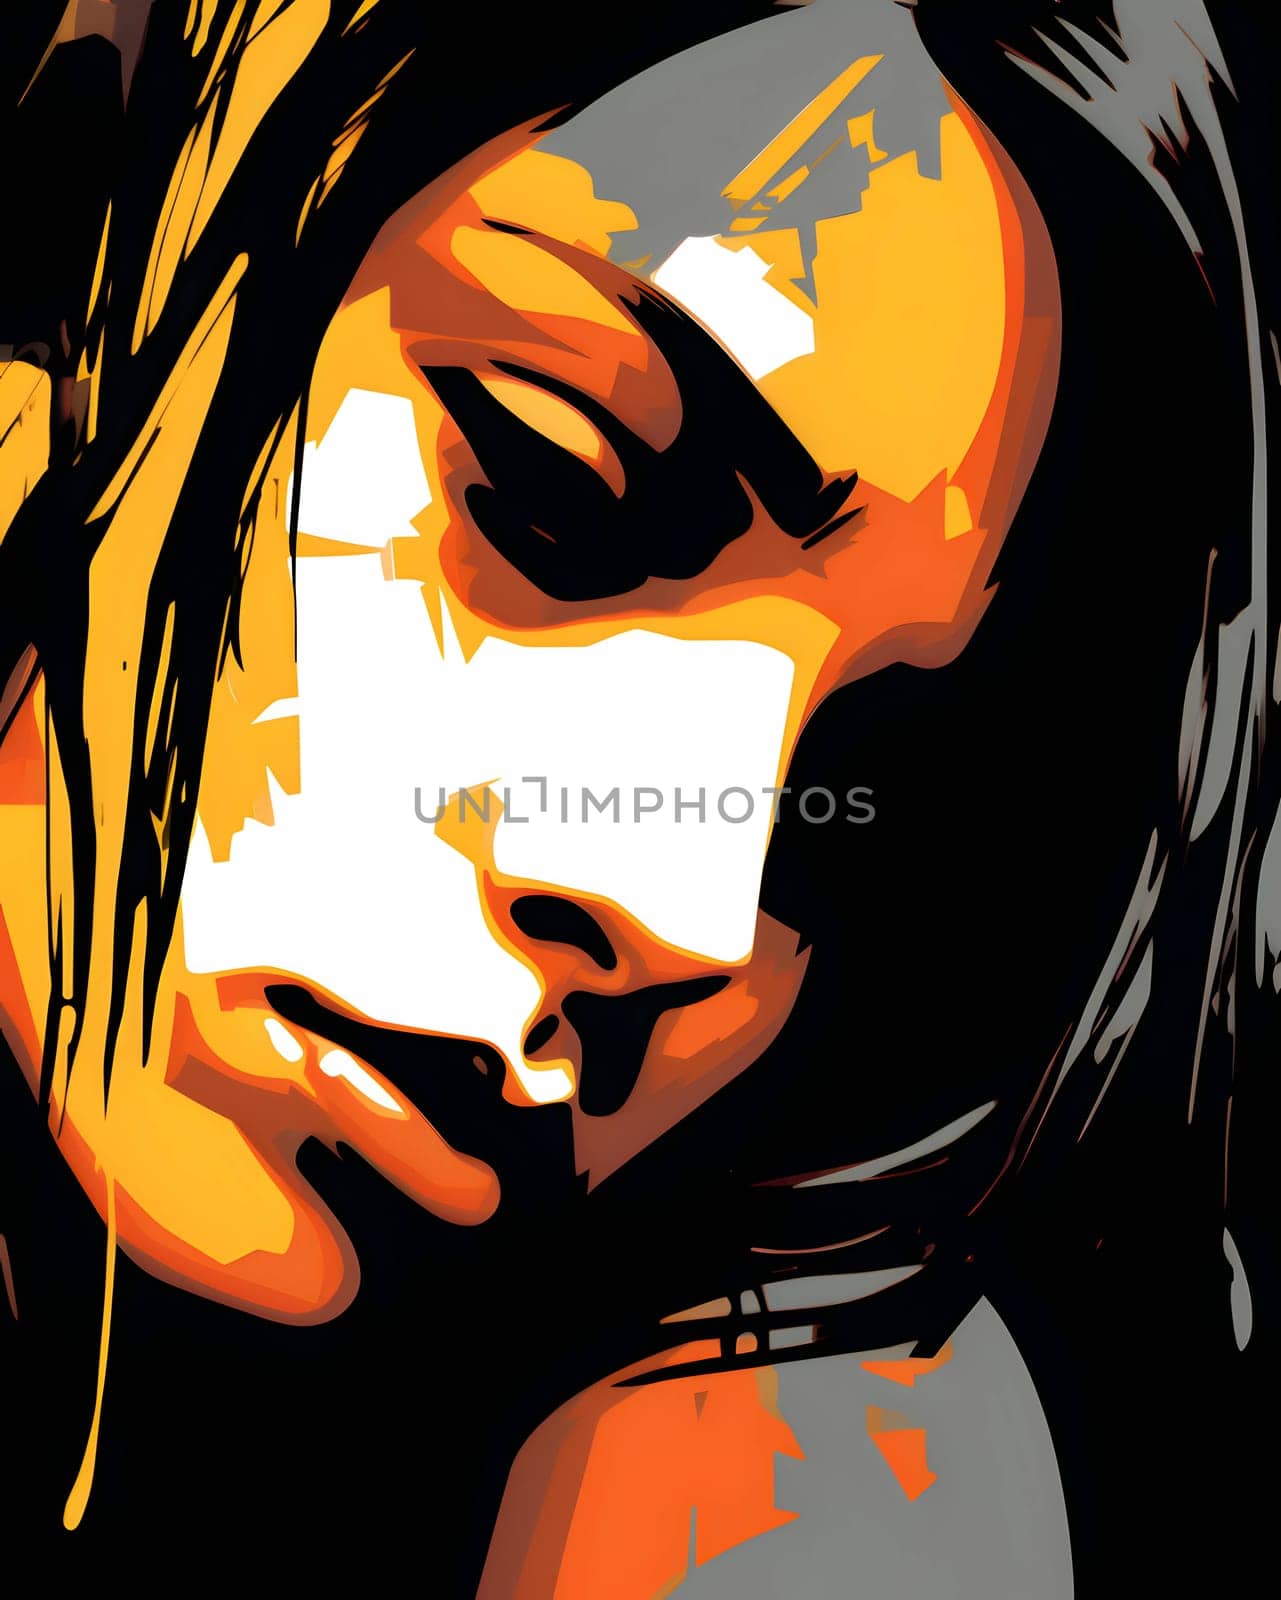 Abstract illustration: Abstract illustration of a female face in the style of pop art.